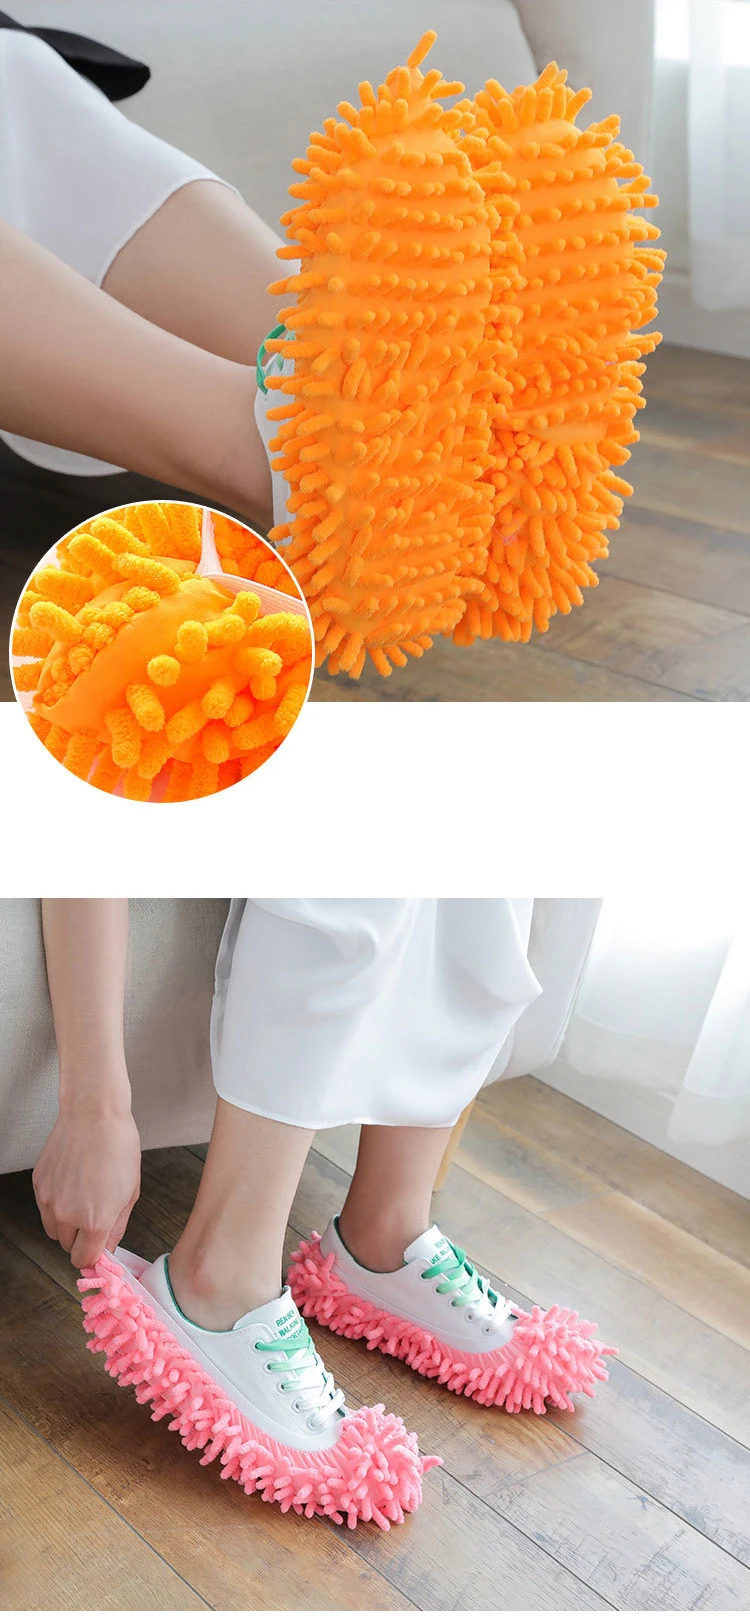 Mop Slippers Shoes 5 Pairs (10 Pieces) - Microfiber Cleaning House Mop  Slippers Floor Cleaning Tools 